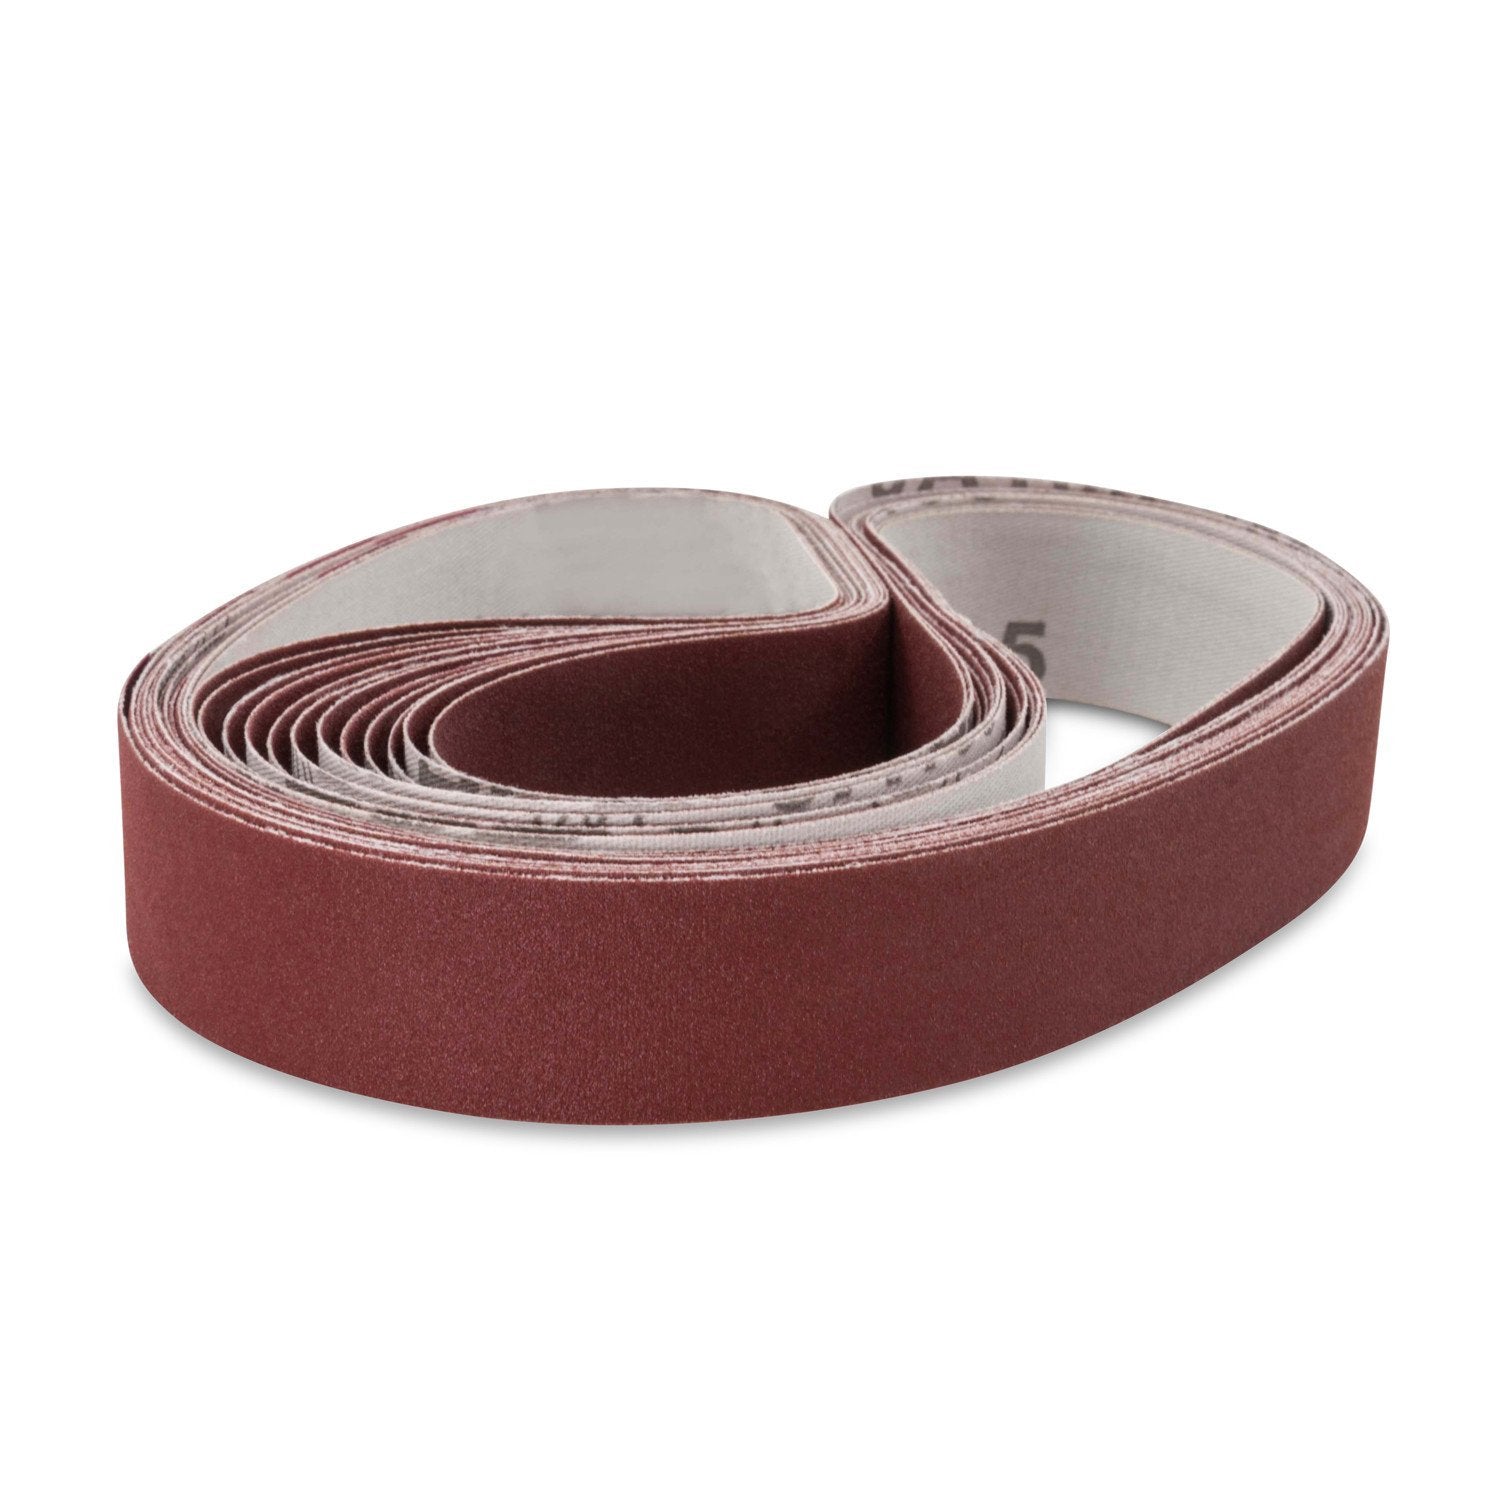 1/2 inch x 12 inch Knife Sharpening Sanding Belts Zirconia 40/60/80  Aluminum Oxide 120/240/320 Silicon Carbide 600/800/1000 Assorted Grits  Sanding Belt for Sharp Knife Sharpener Belt Sander - Yahoo Shopping